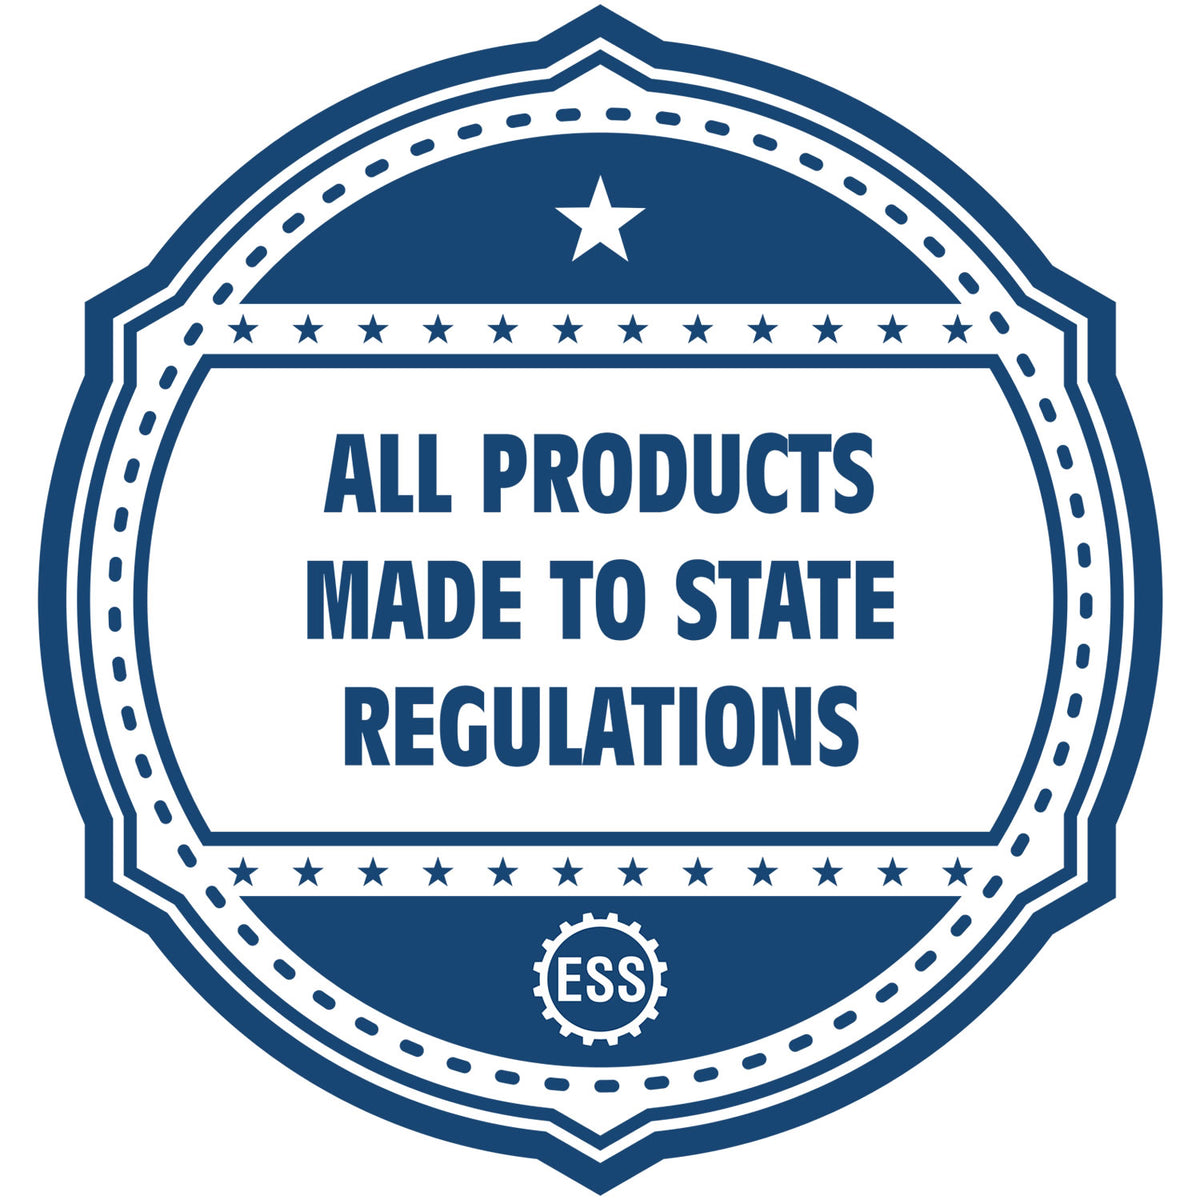 An icon or badge element for the Slim Pre-Inked Washington Professional Engineer Seal Stamp showing that this product is made in compliance with state regulations.